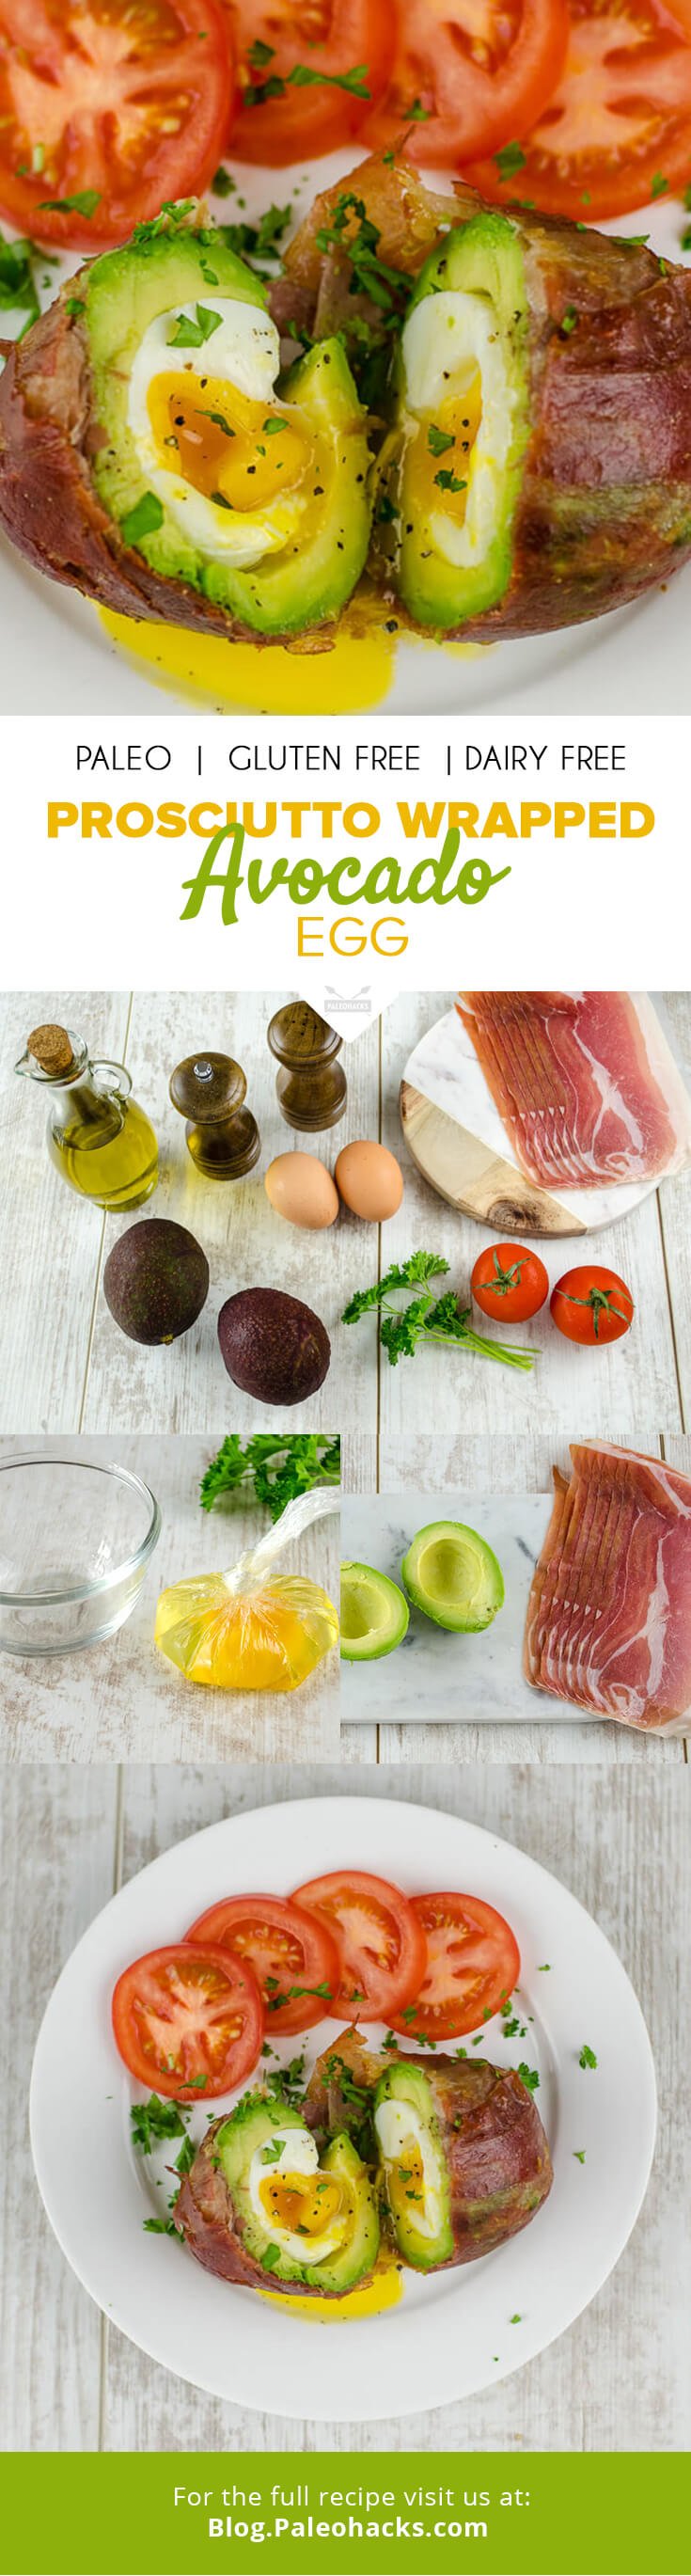 Give your morning a kick start with this prosciutto-wrapped avocado egg! Loaded with omega-3s and healthy fats, it's all you need for a healthy breakfast.